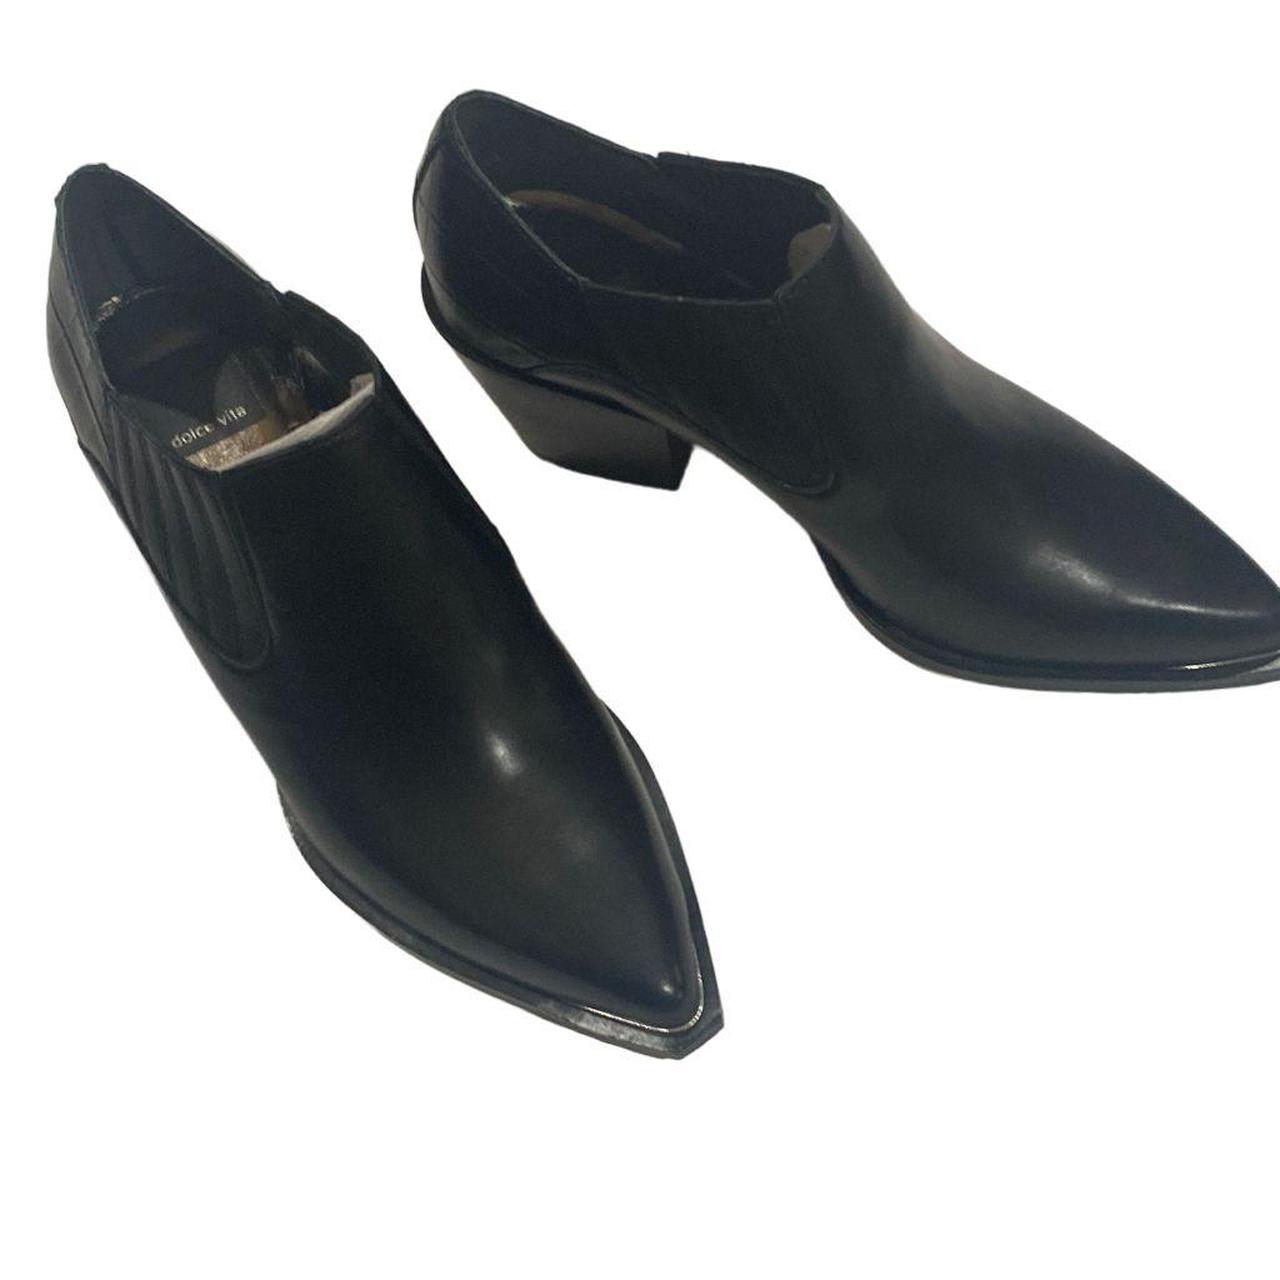 Product Image 3 - DOLCE VITA Women's Black Pointed